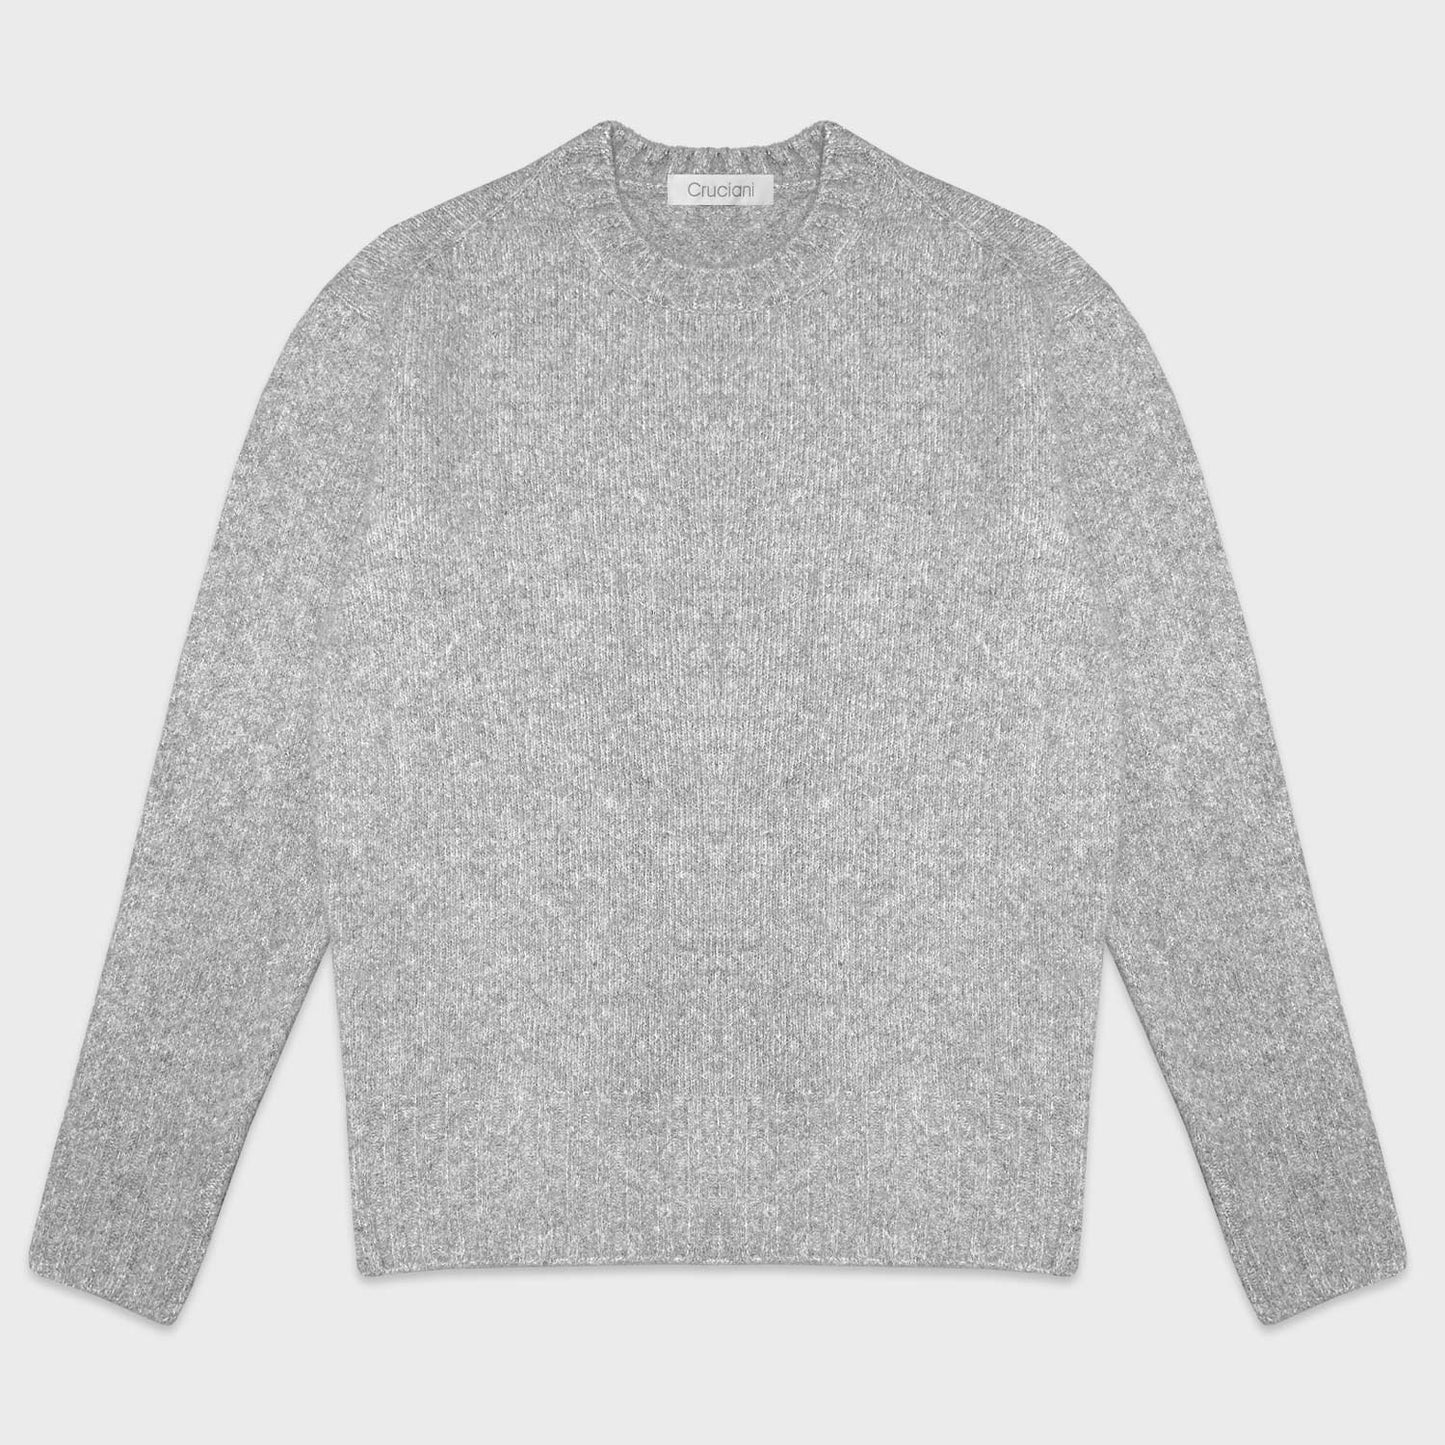 Cloud Grey Shetland Wool Crewneck Sweater Cruciani. This sweater is made in Italy by Cruciani using a balanced dose of cashmere wool and artificial fibers to create a felted effect typical of Scottish Shetland sweaters, not hispid knit to the touch.